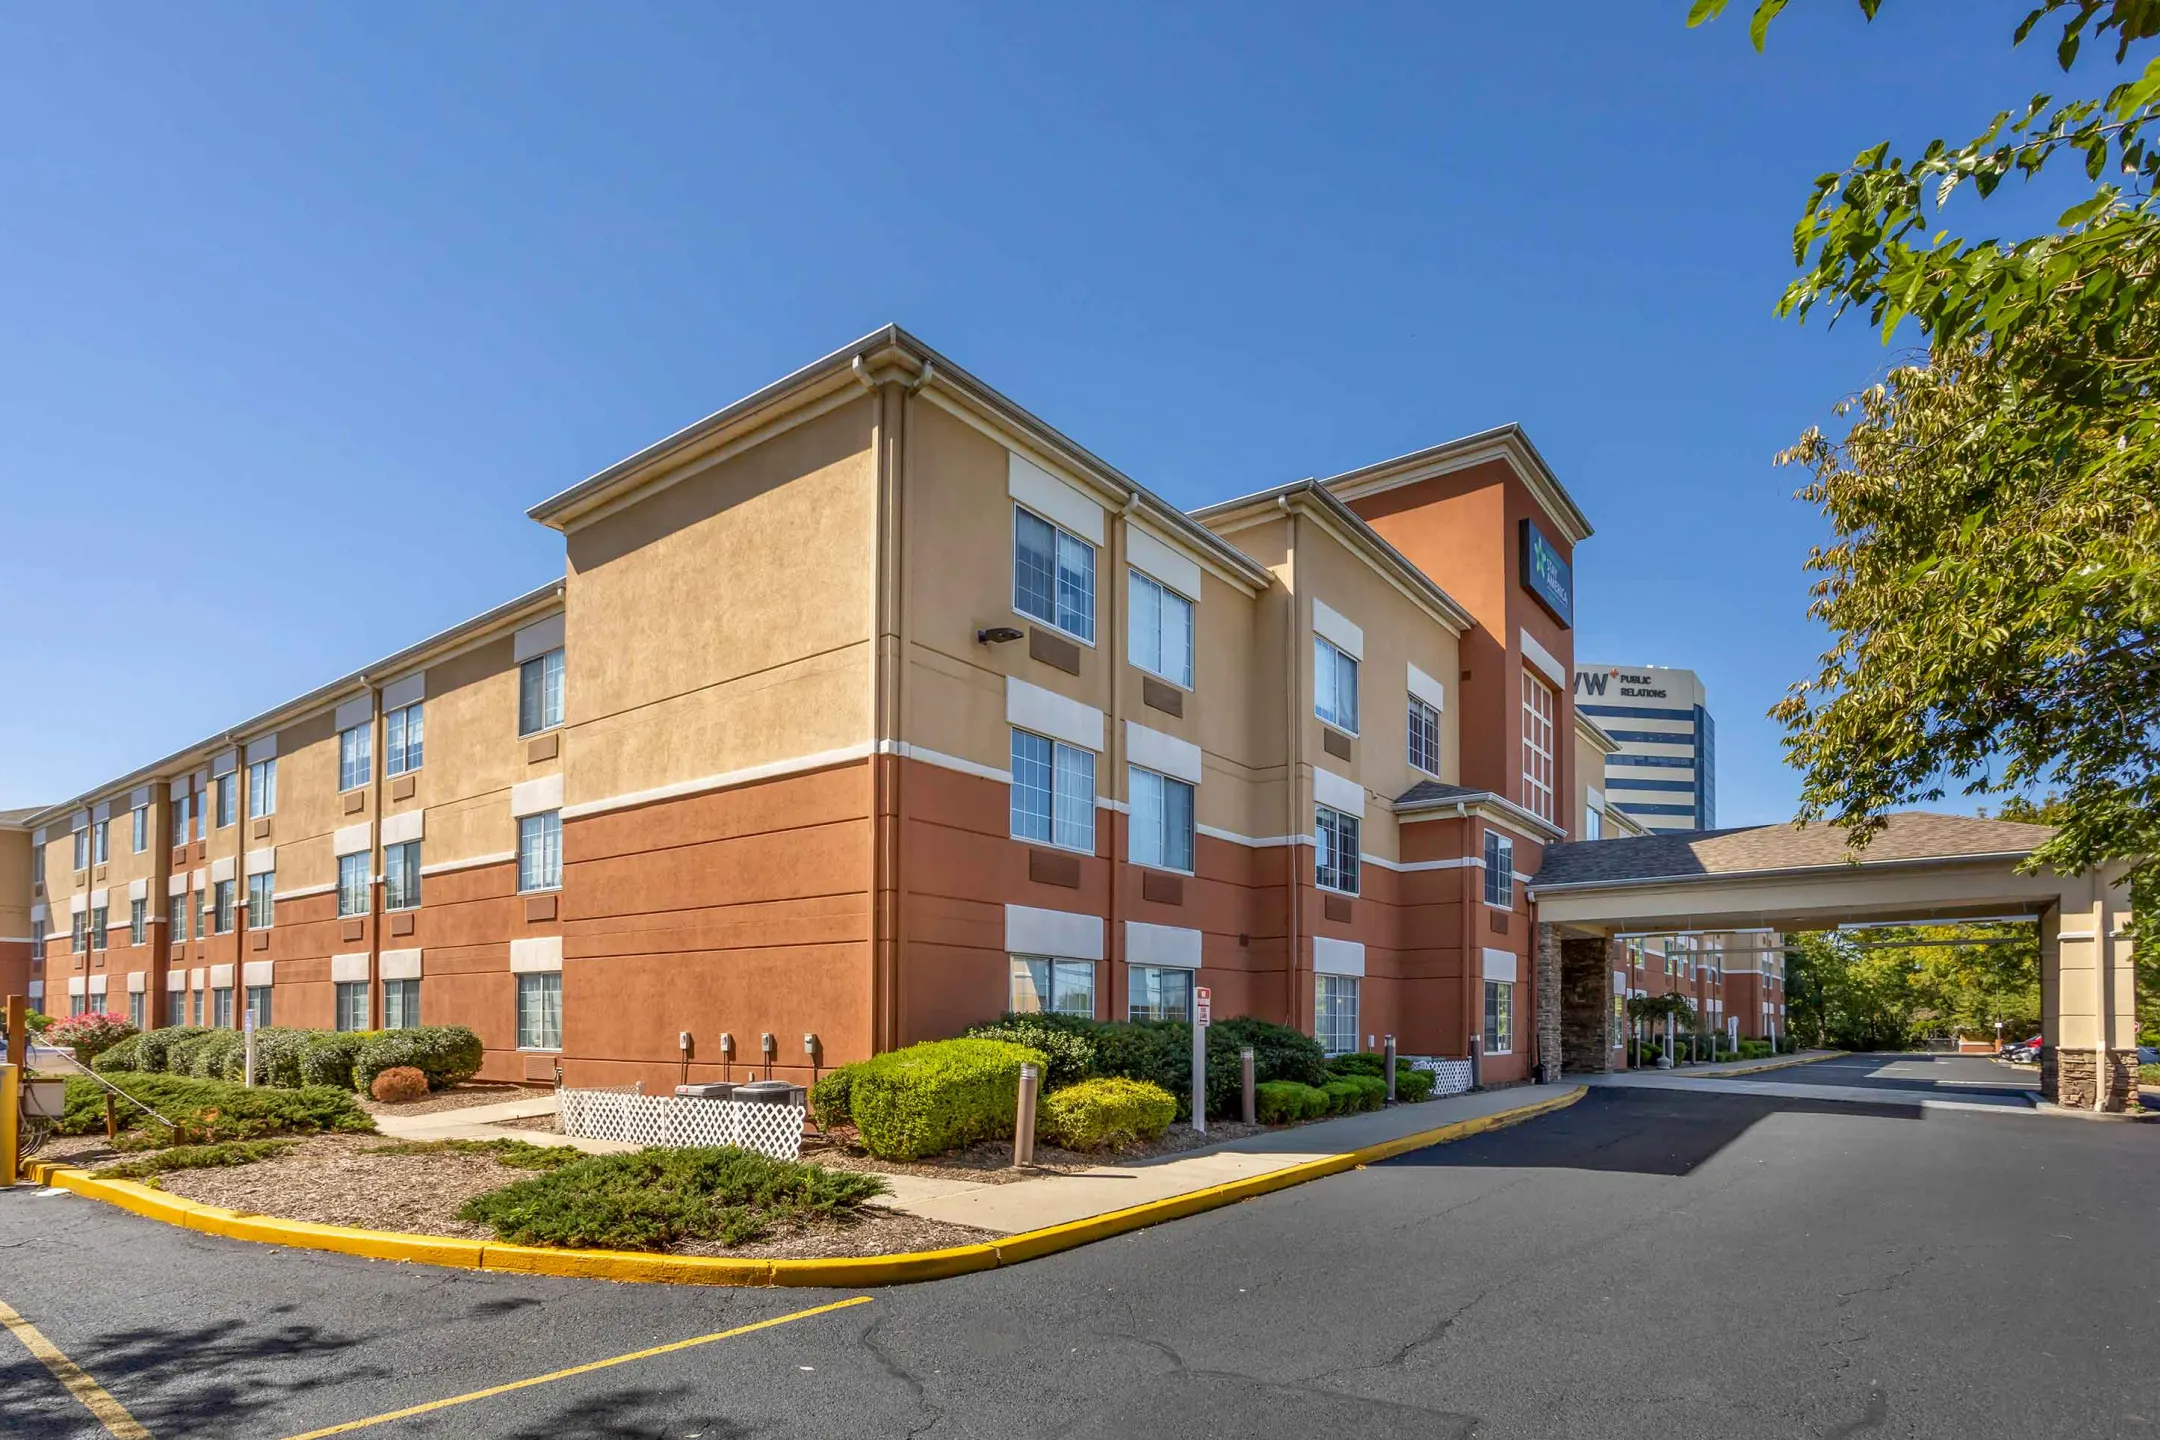 Building - Furnished Studio - Meadowlands - East Rutherford - East Rutherford, NJ